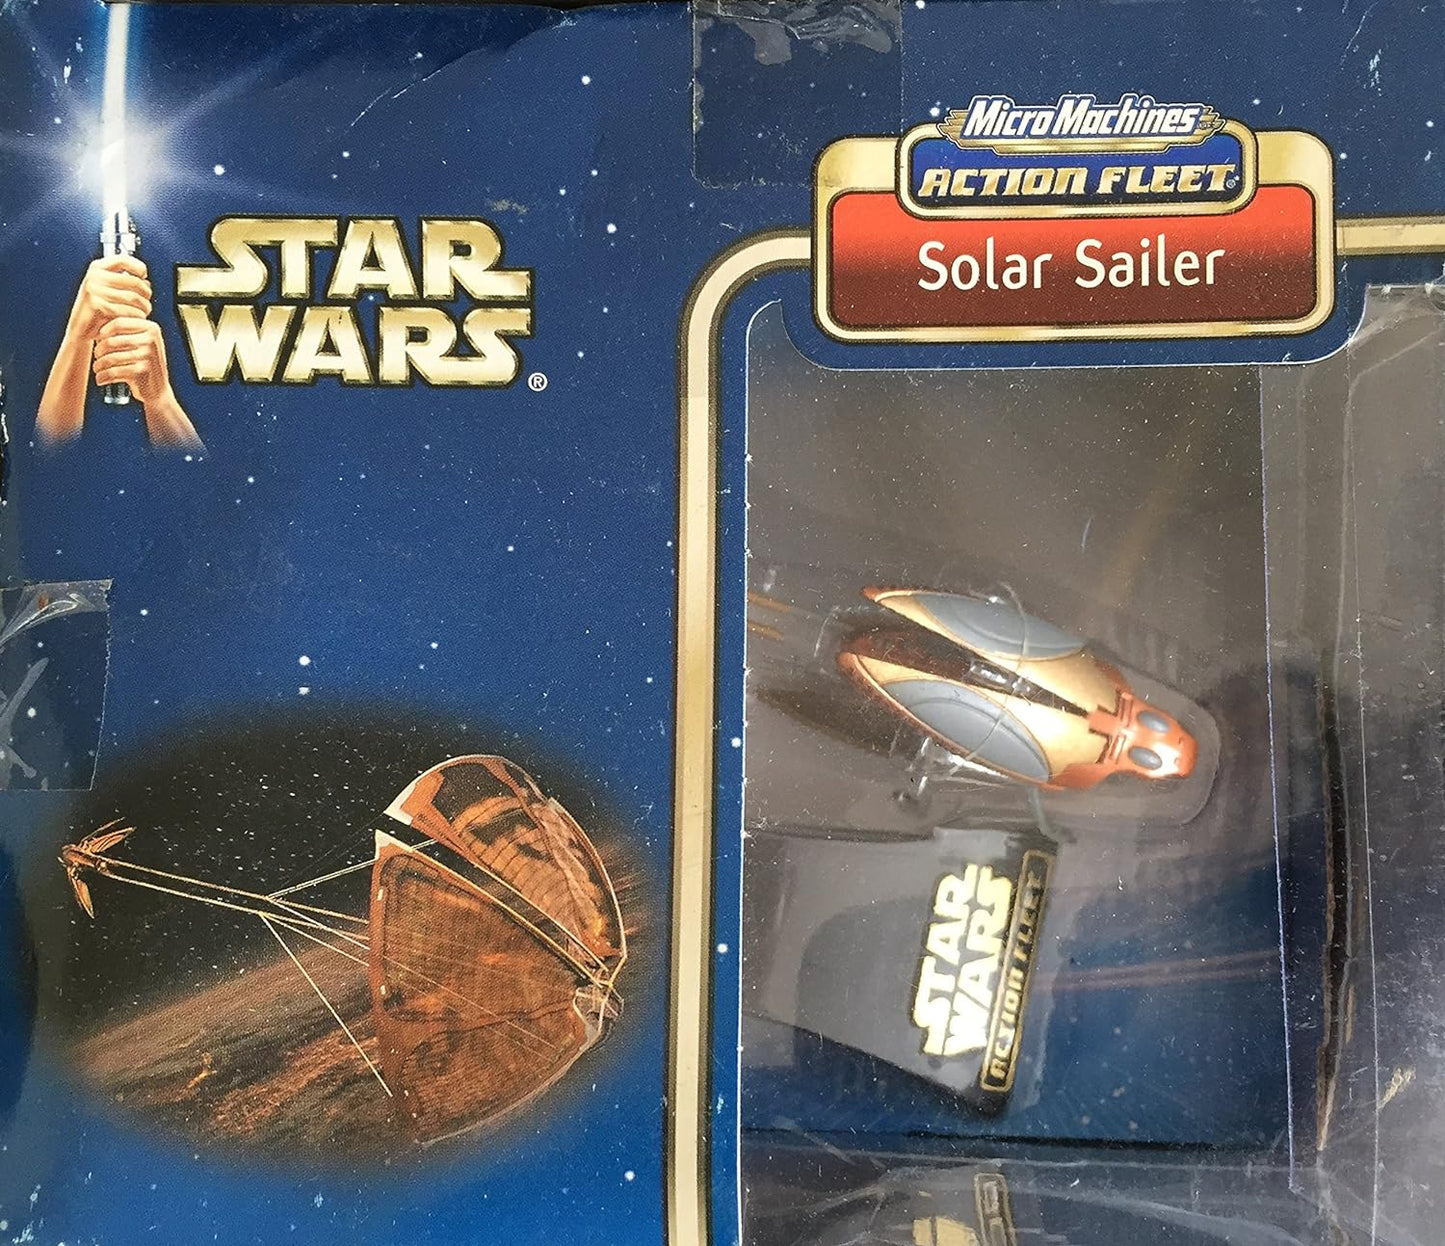 Vintage 2002 Star Wars Micro Machines Action Fleet Solar Sailer with Display Stand - Shop Stock Room Find